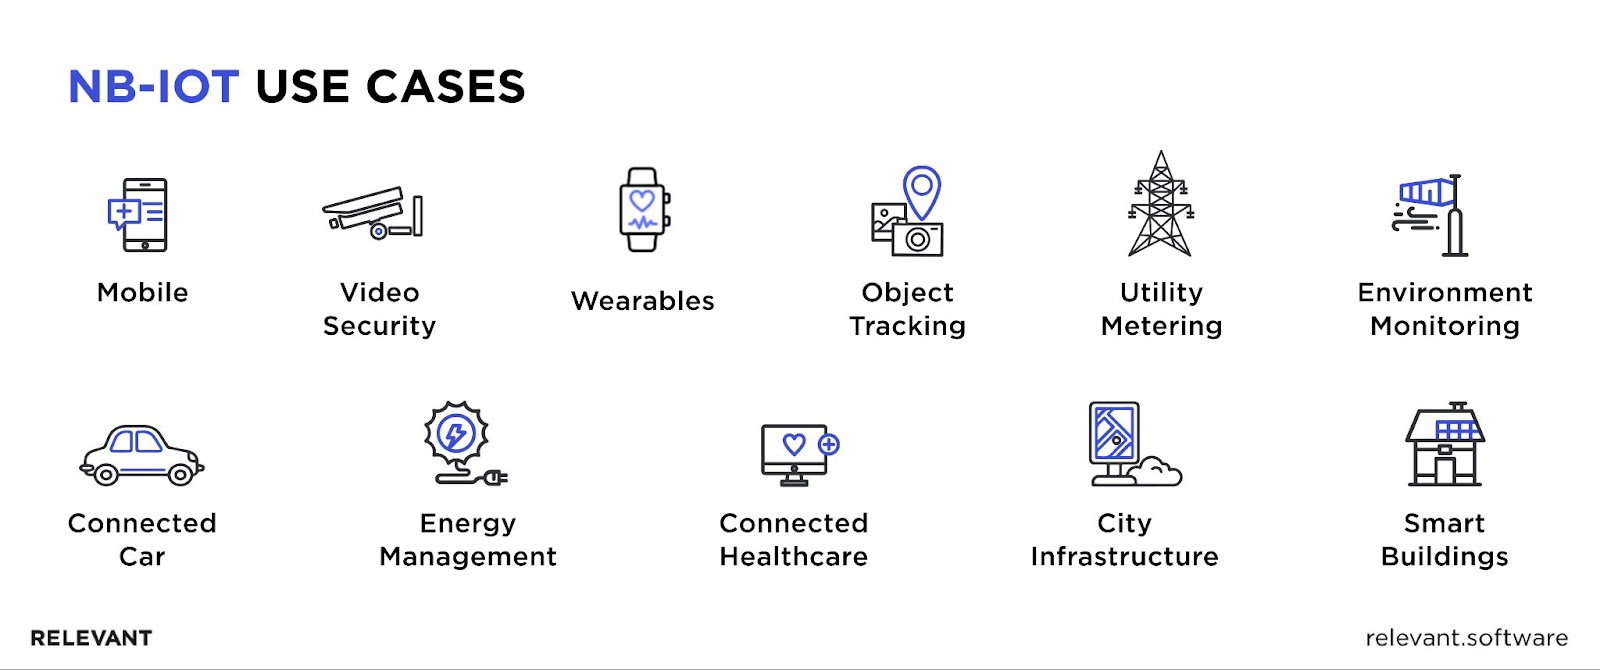 NB-IoT use cases